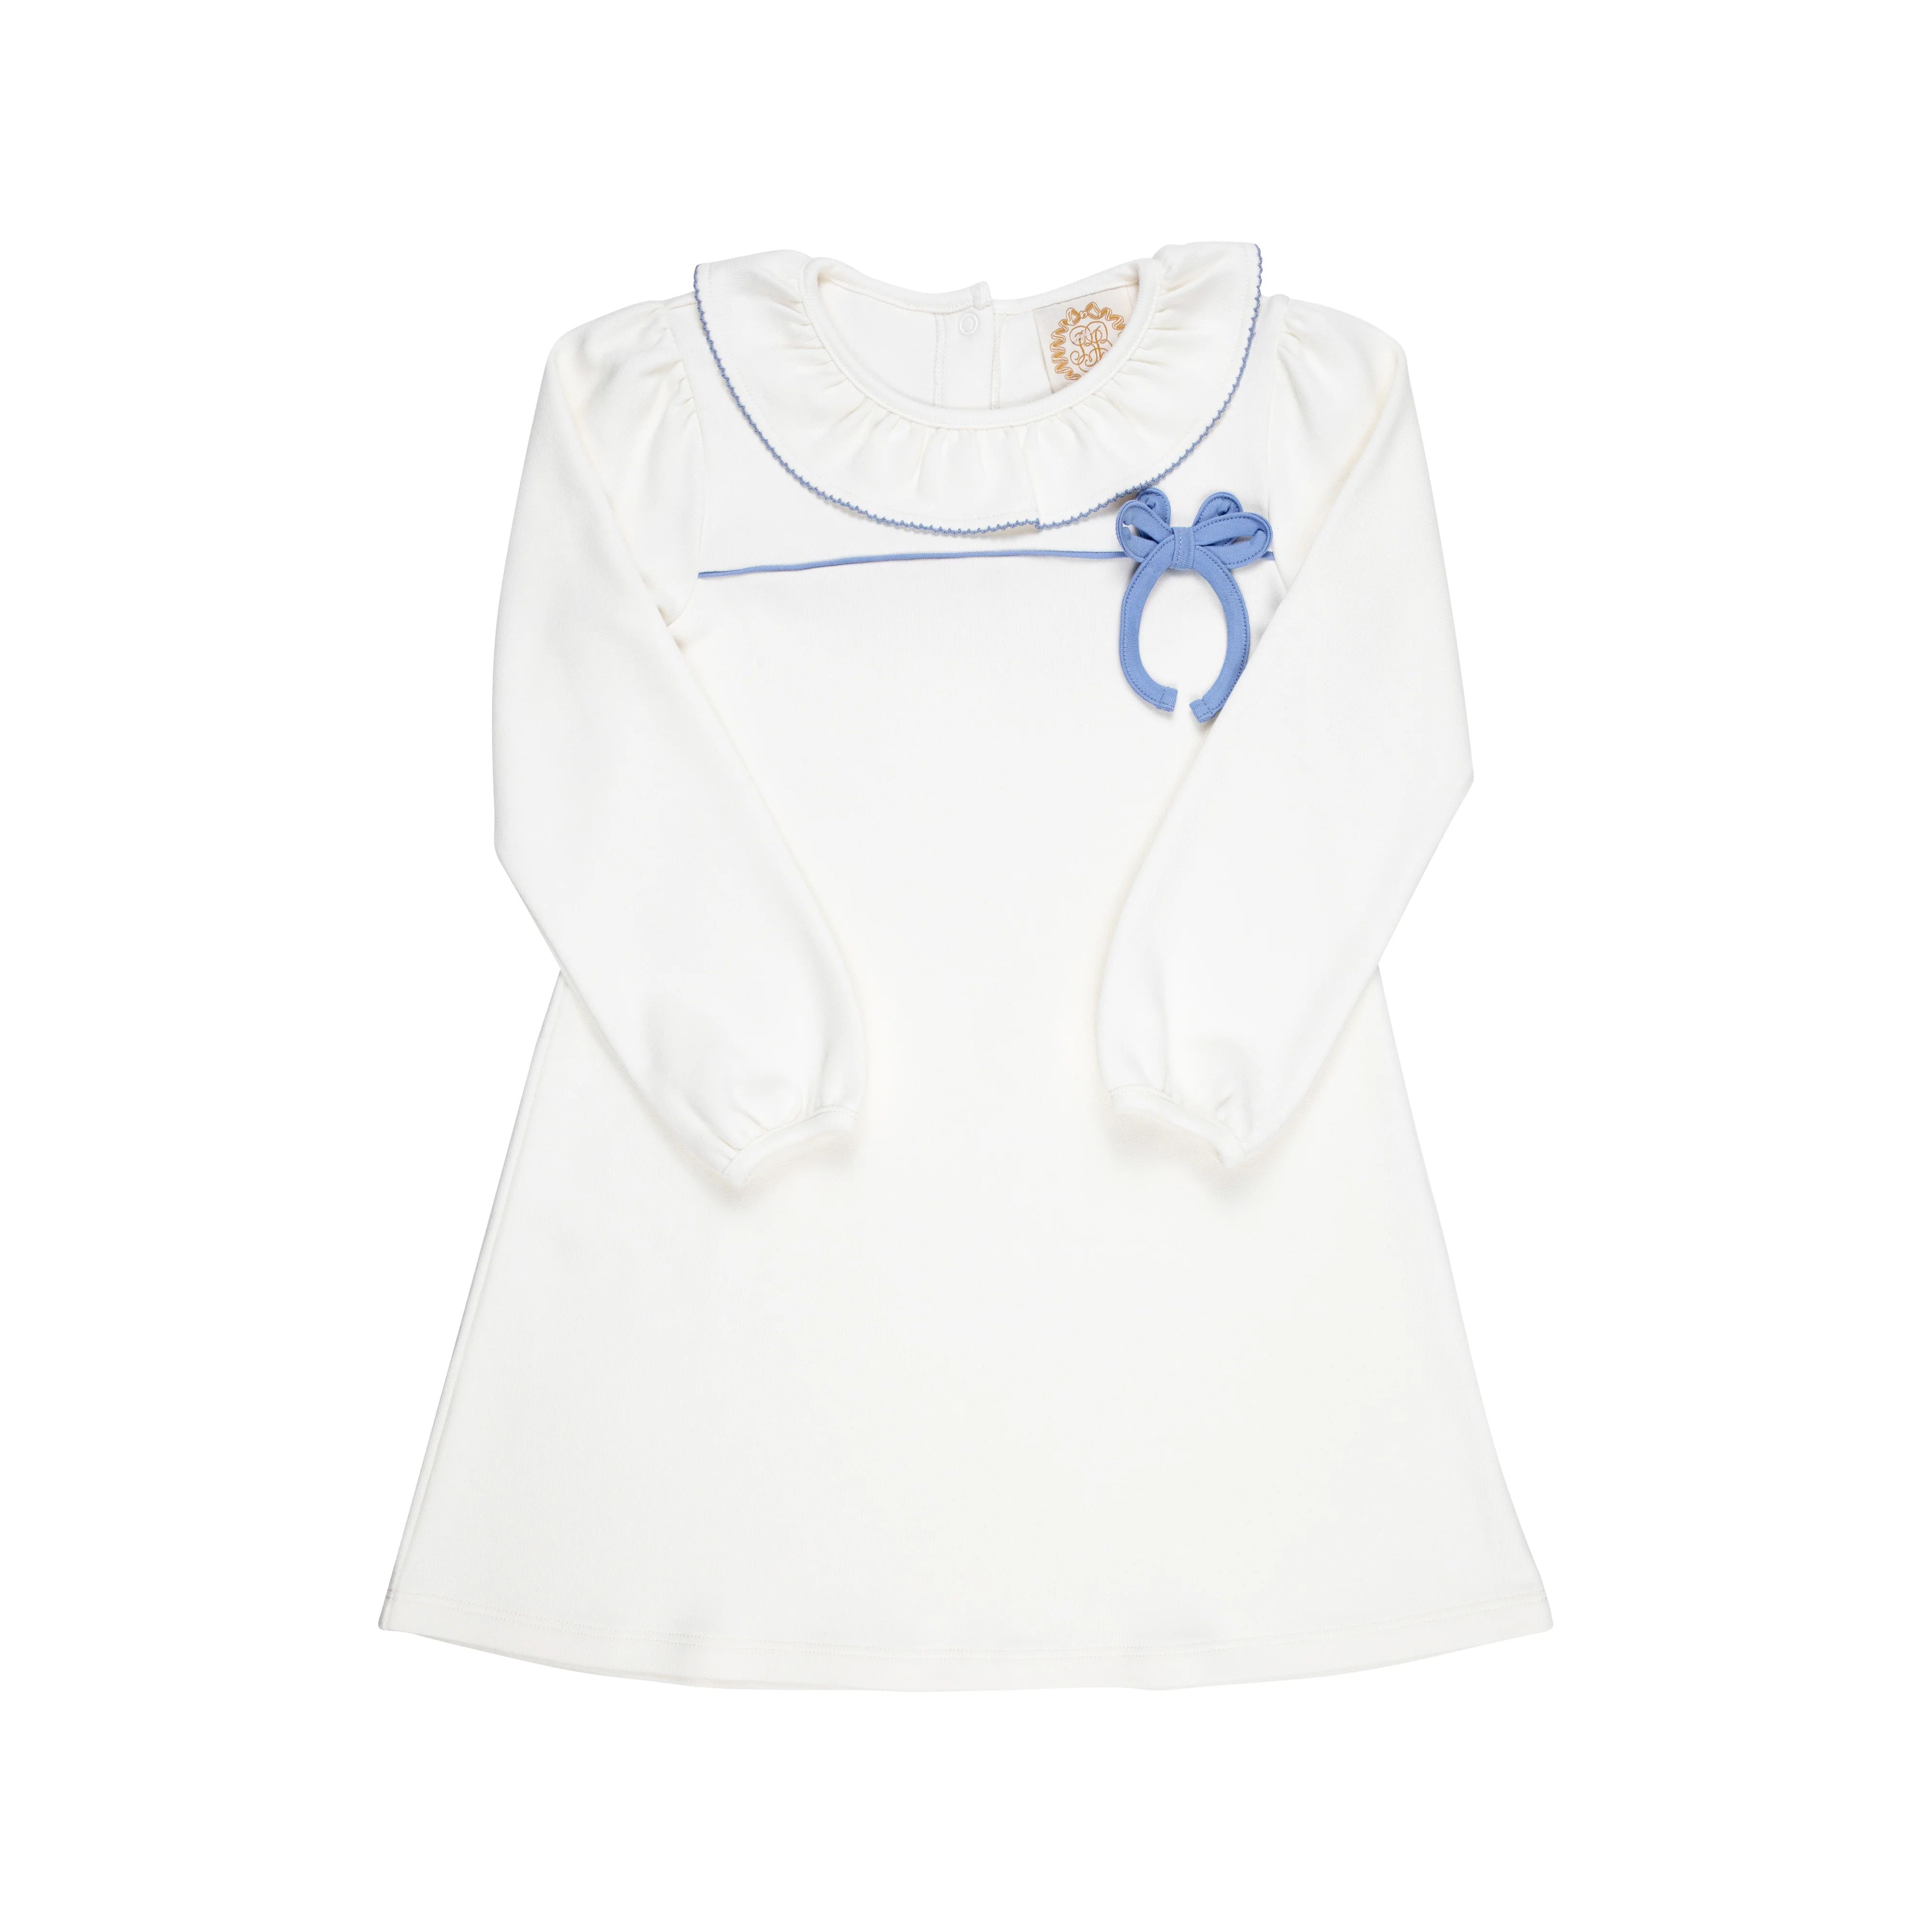 Rachel Price Ruffle Dress - Palmetto Pearl with Park City Periwinkle | The Beaufort Bonnet Company